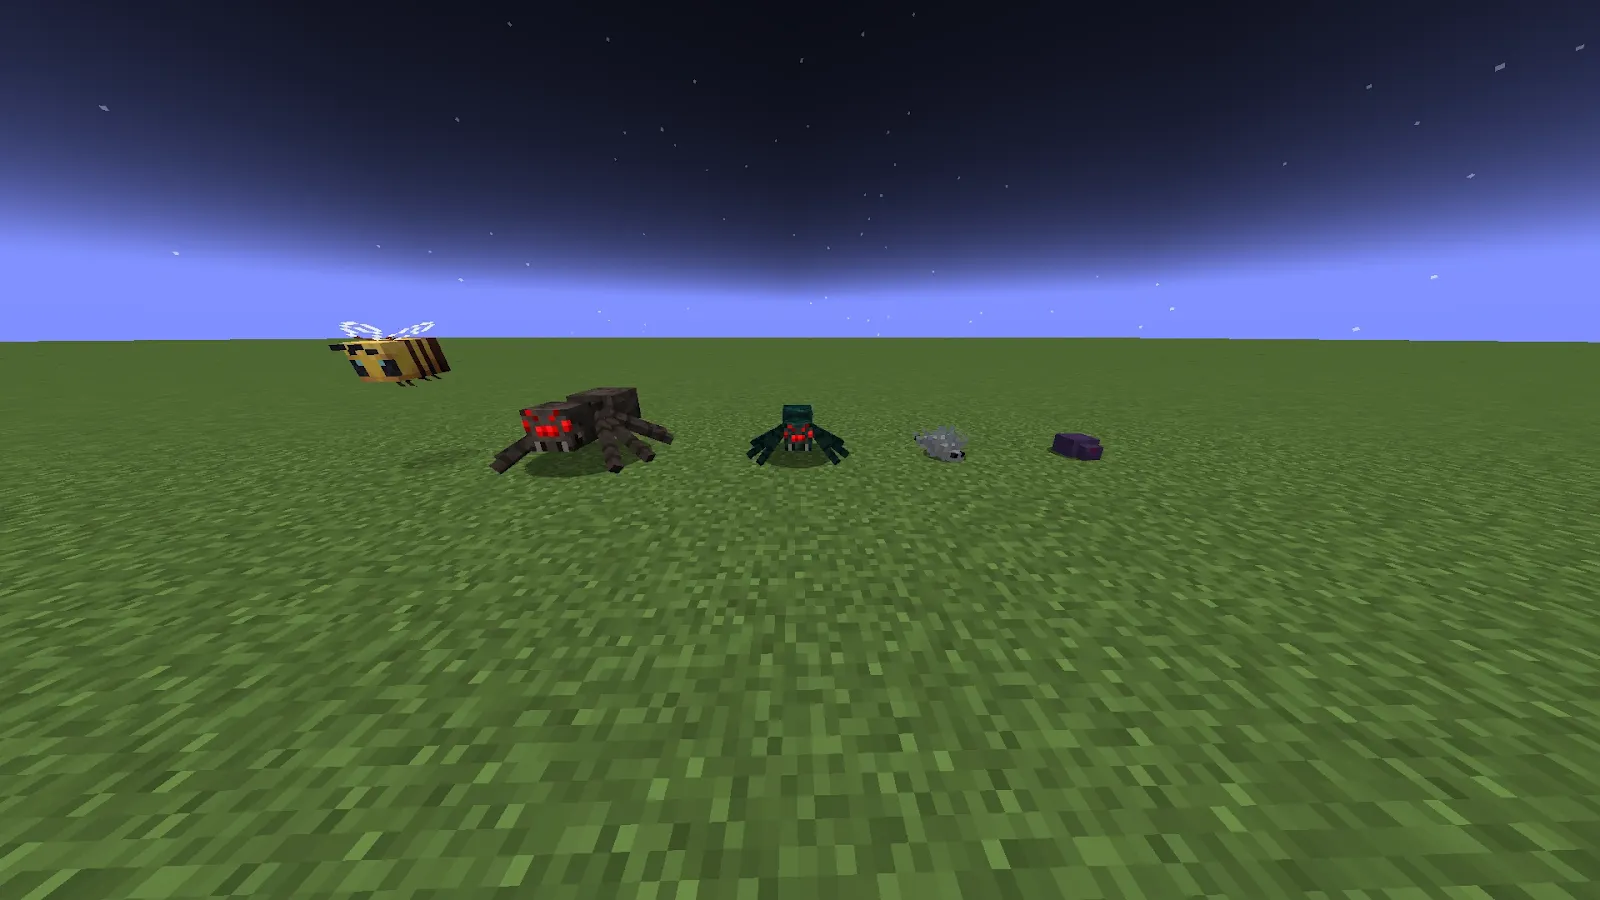 An image of various arthropods in Minecraft